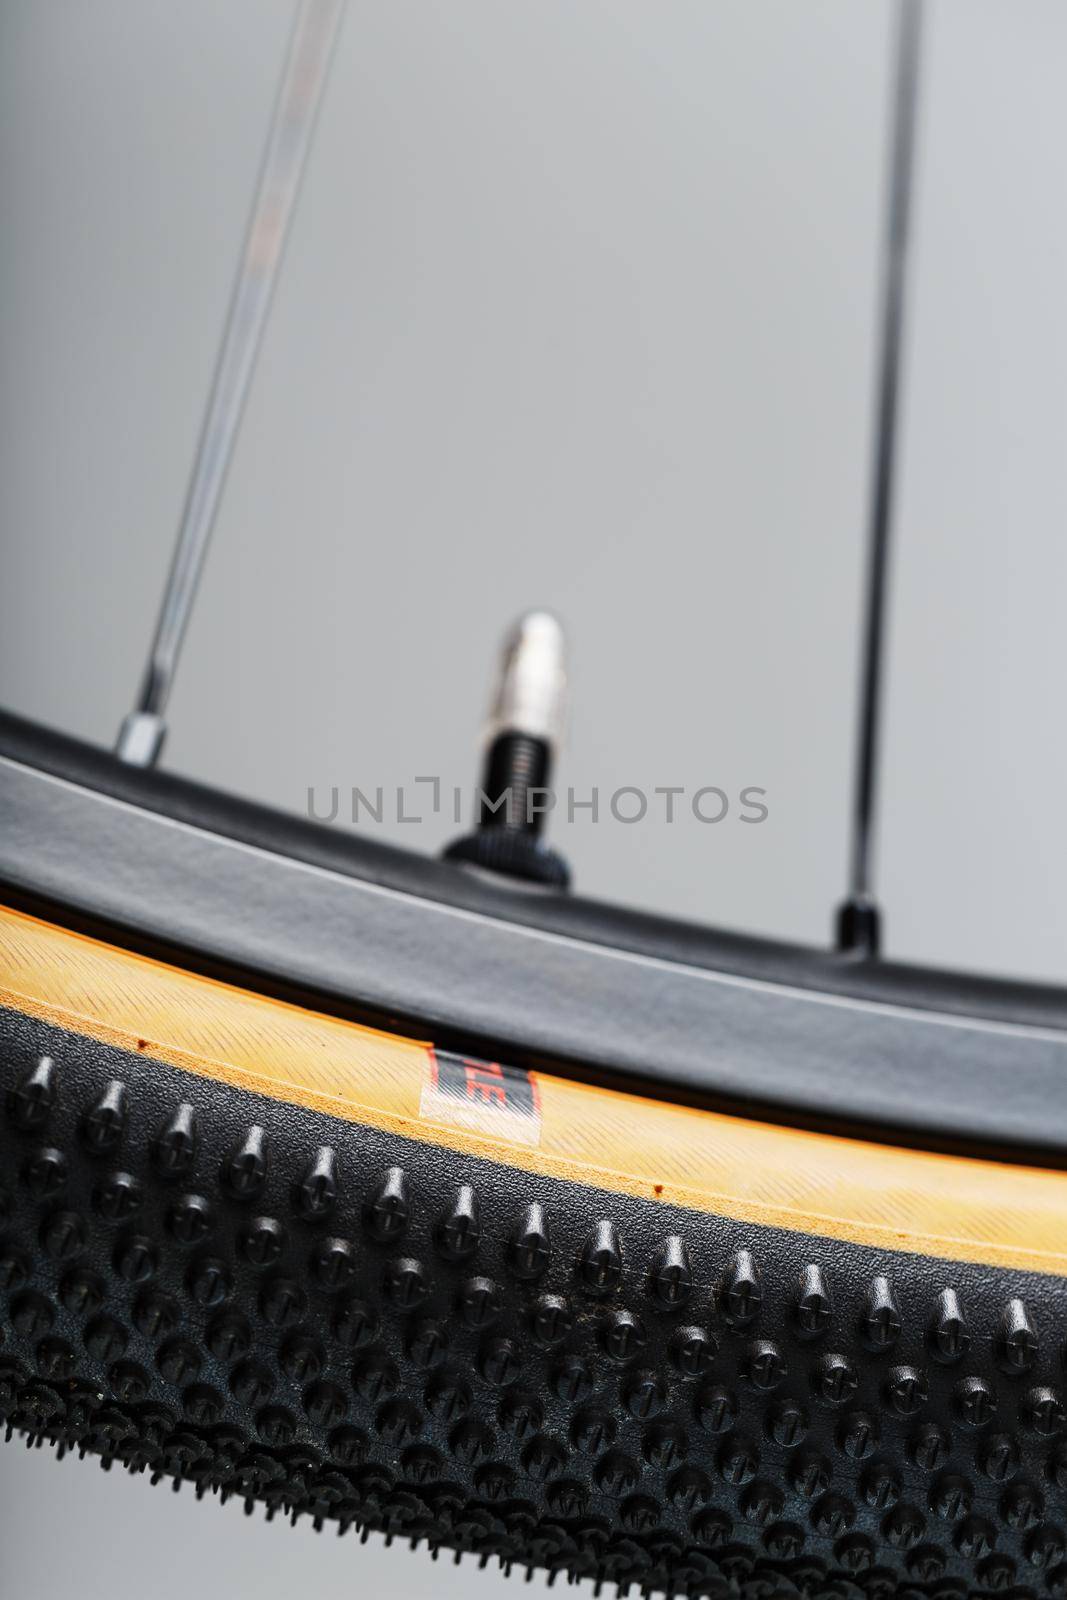 Presta bicycle nipple on the rim for swapping wheels close-up